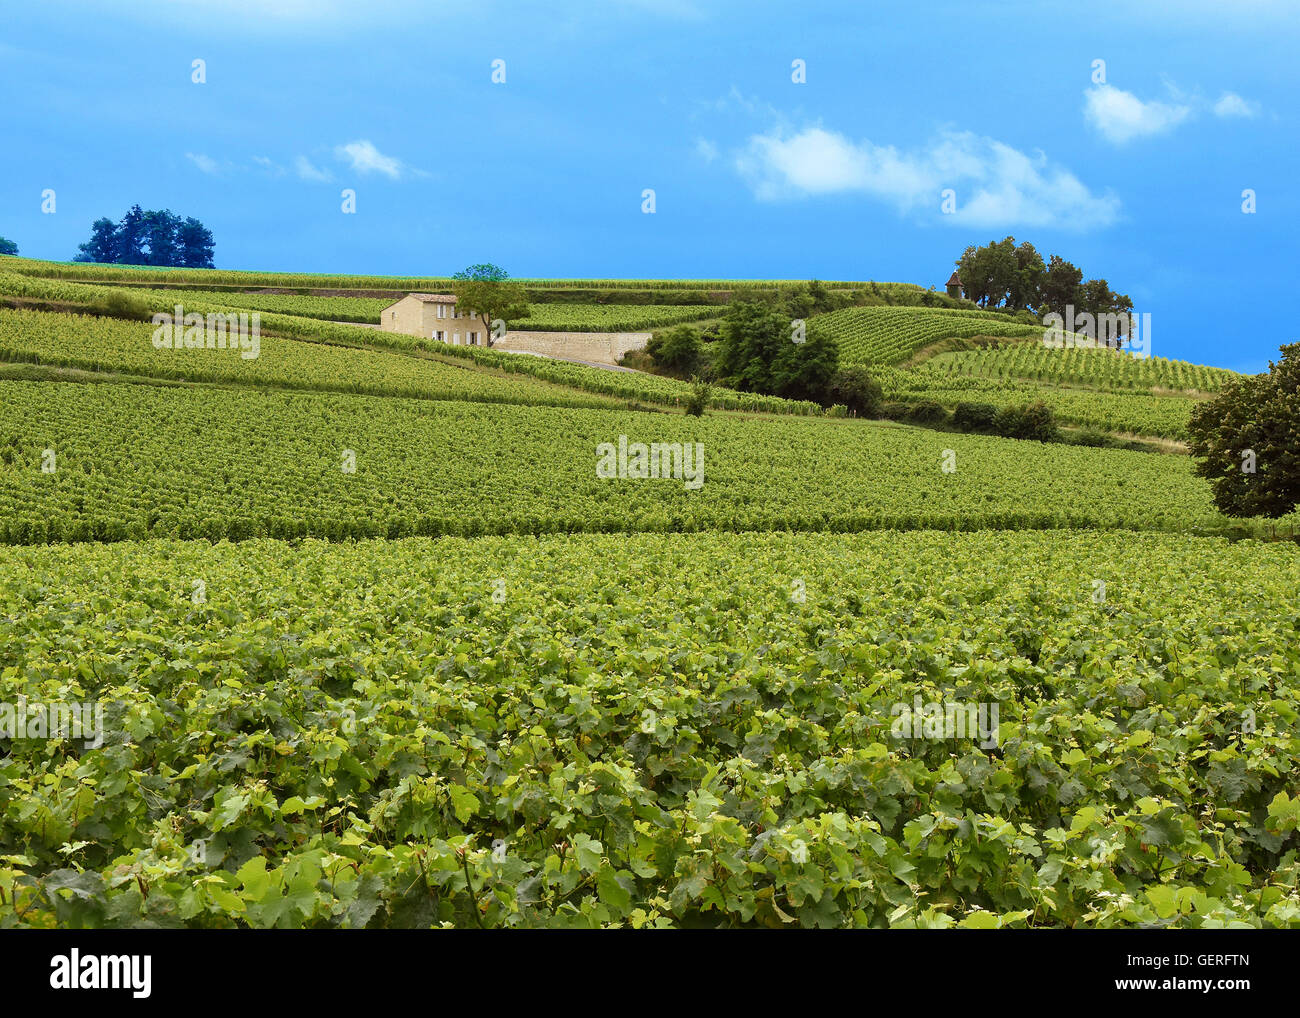 Saint Emilion Gironde France Vineyards Winemakers Houses Chateaux Rows of Vines Stock Photo